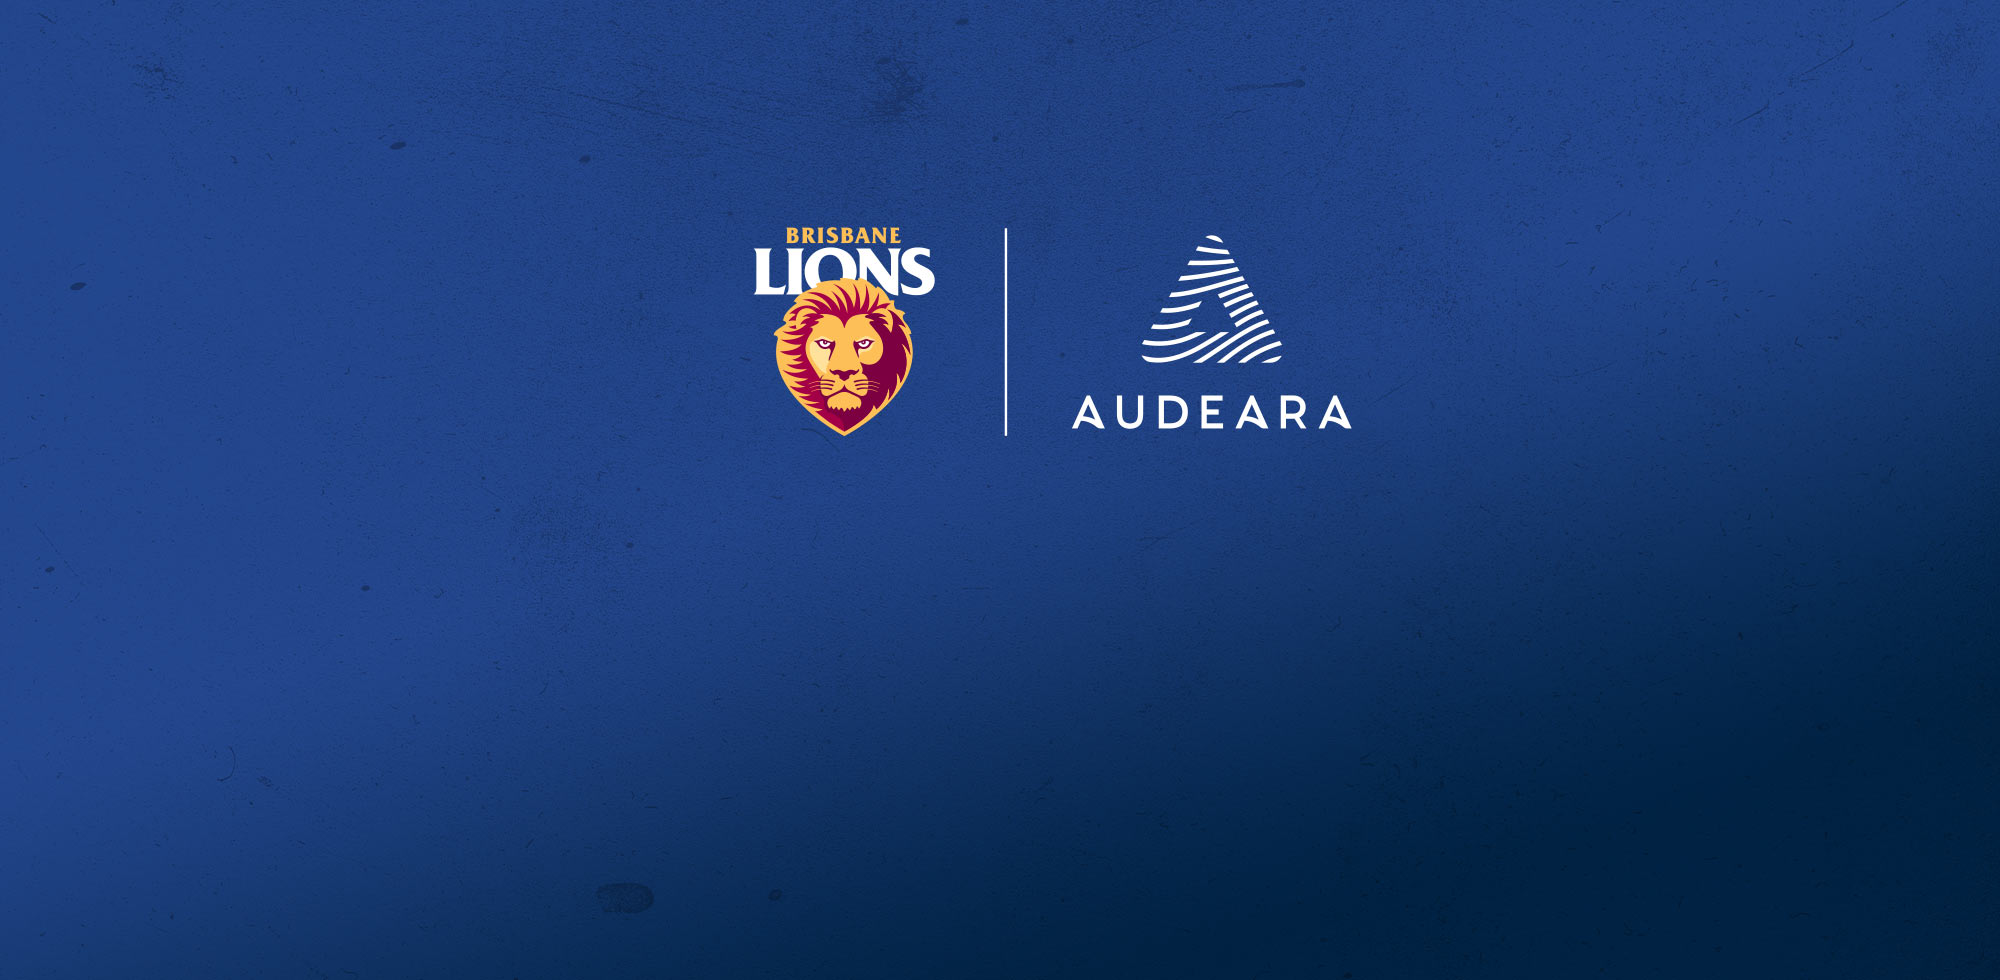 Brisbane Lions and Audeara logos on a blue background